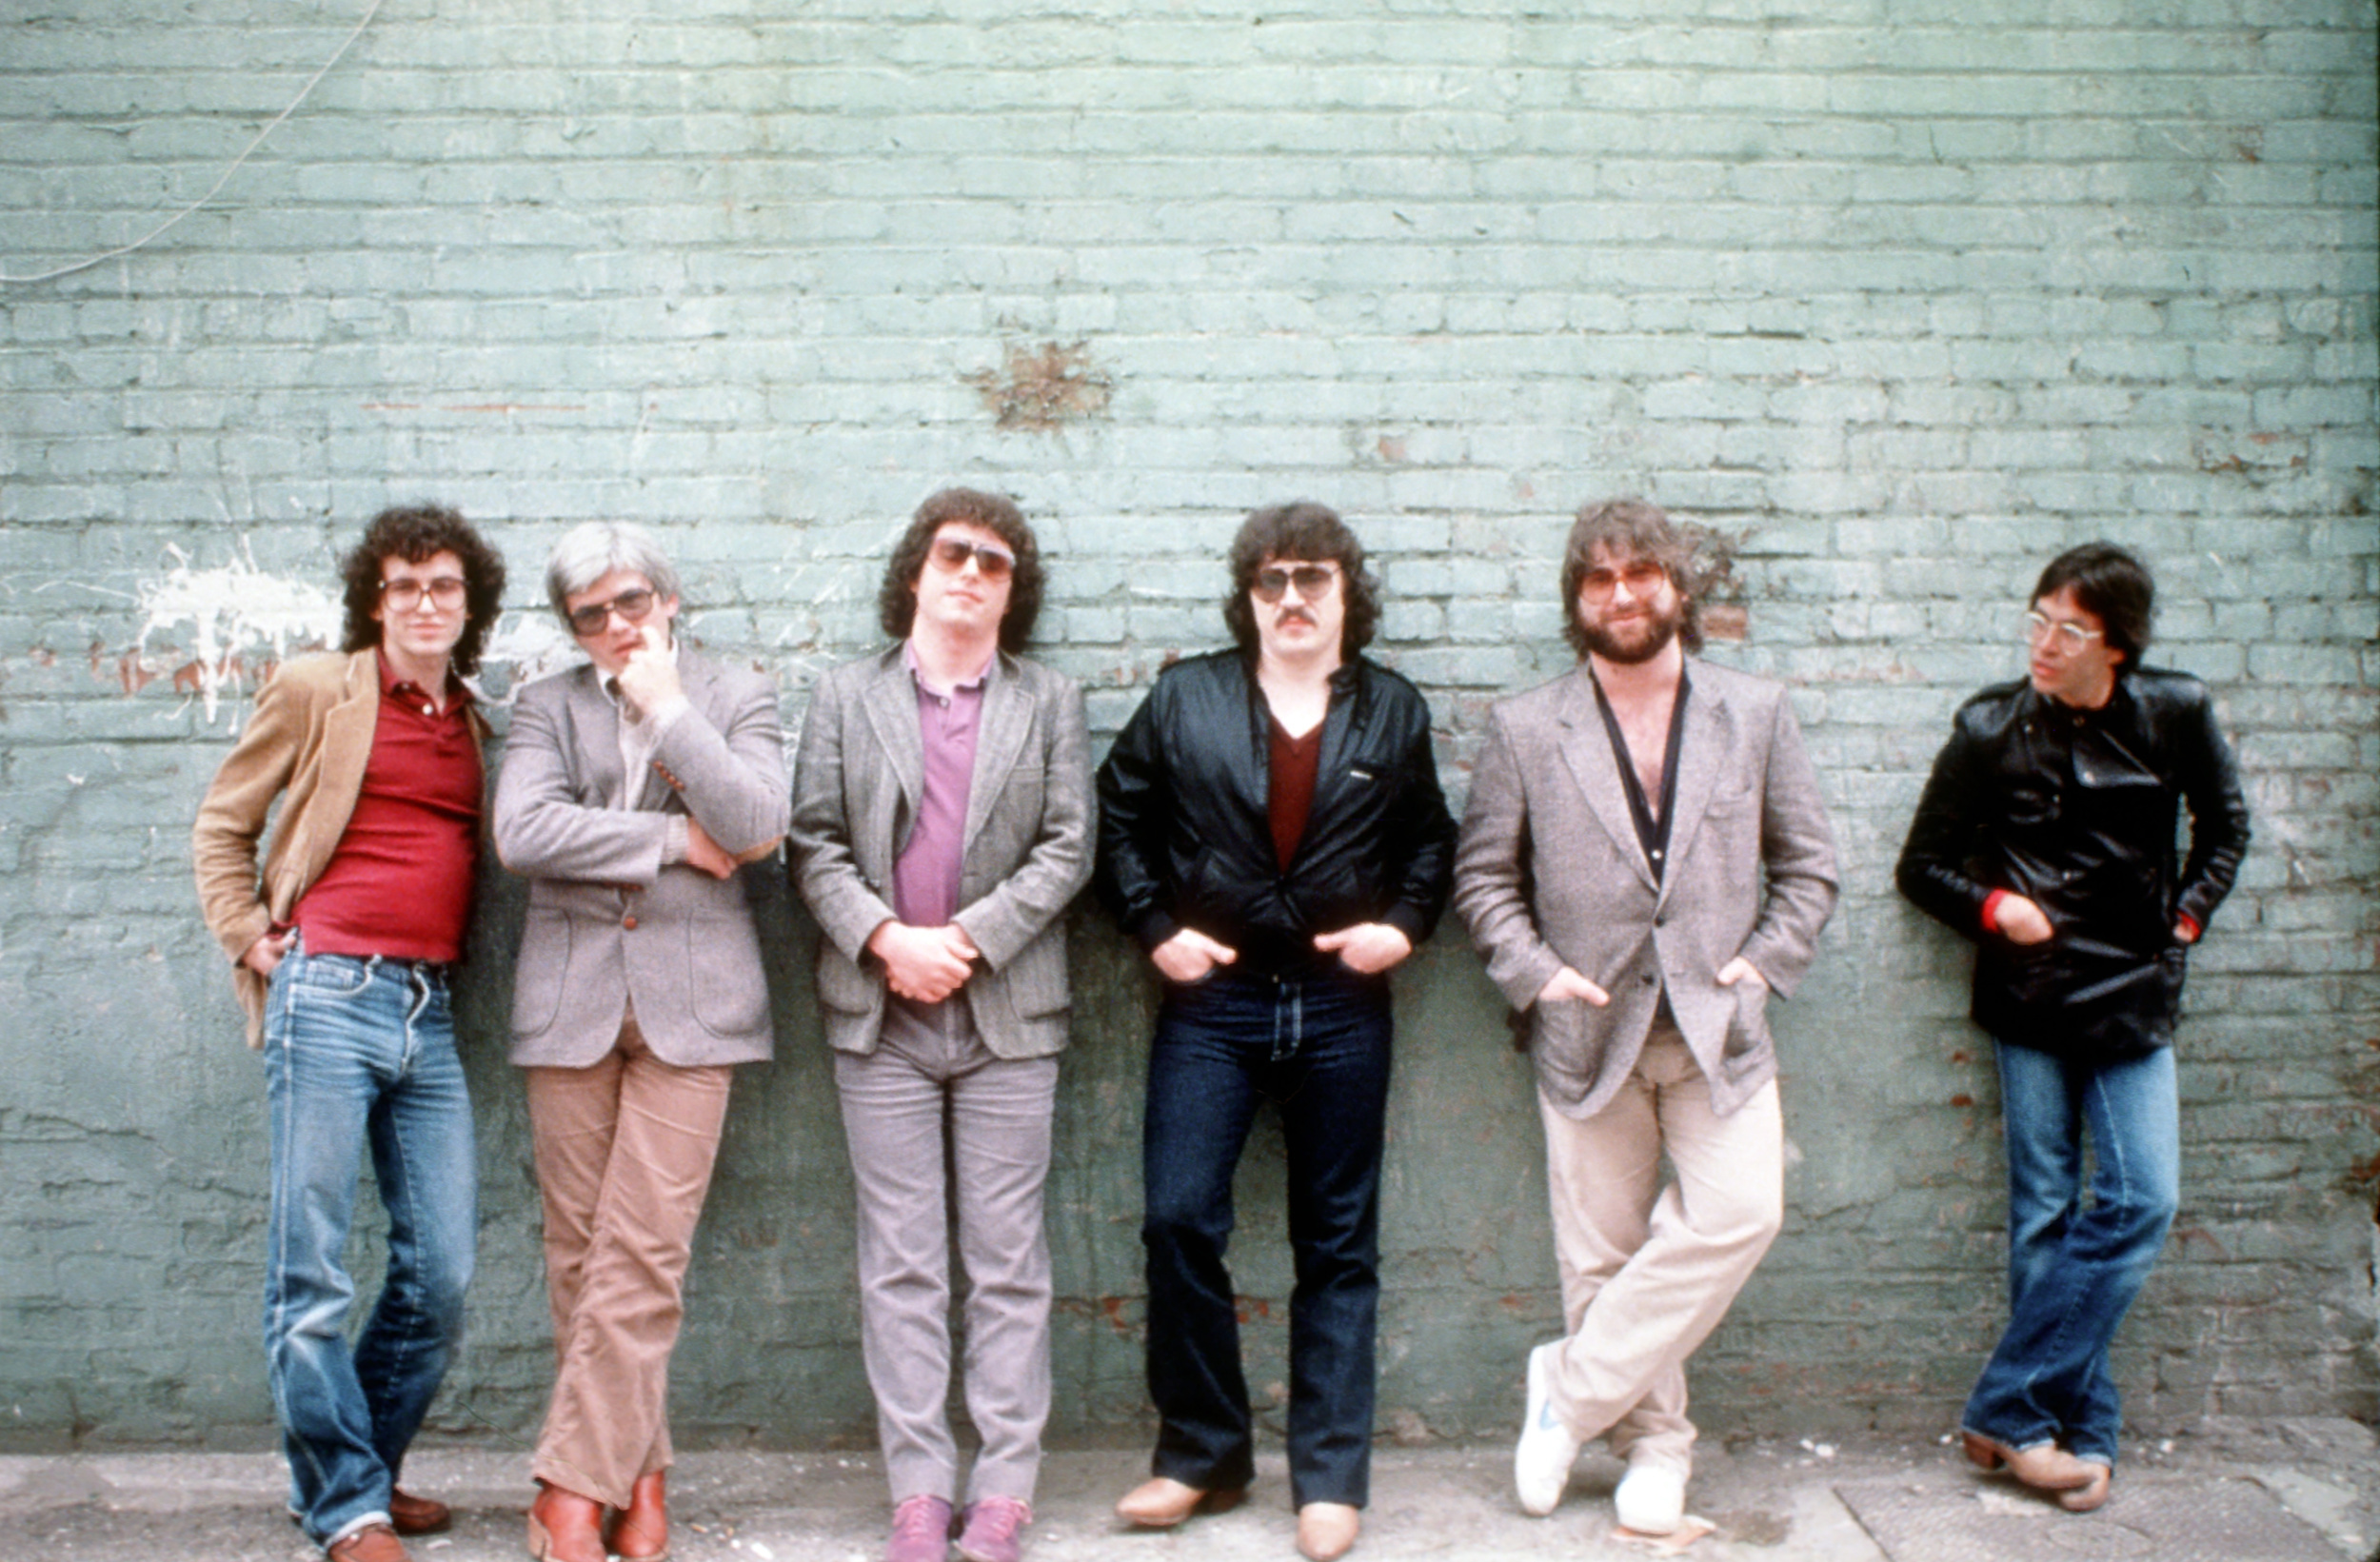 <p>Toto rightfully has a place in the yacht rock world, but the band also broke into the top-40, FM radio, and MTV mainstream with the release of 1982's <em>Toto IV</em>. <a href="https://www.youtube.com/watch?v=qmOLtTGvsbM">"Rosanna"</a> was a big reason for the album's success, peaking at No. 2 on <em>Billboard</em>'s Hot 100 and winning the Record of the Year Grammy Award. Sure, it's not typical yacht rock fare, per se. It's certainly heavier than other popular tracks on this list, but it's certainly a product of AOR and still routinely played in dentist offices throughout America. </p><p>You may also like: <a href='https://www.yardbarker.com/entertainment/articles/17_most_memorable_country_music_one_hit_wonders_101723/s1__38322545'>17 most memorable country music one-hit wonders</a></p>